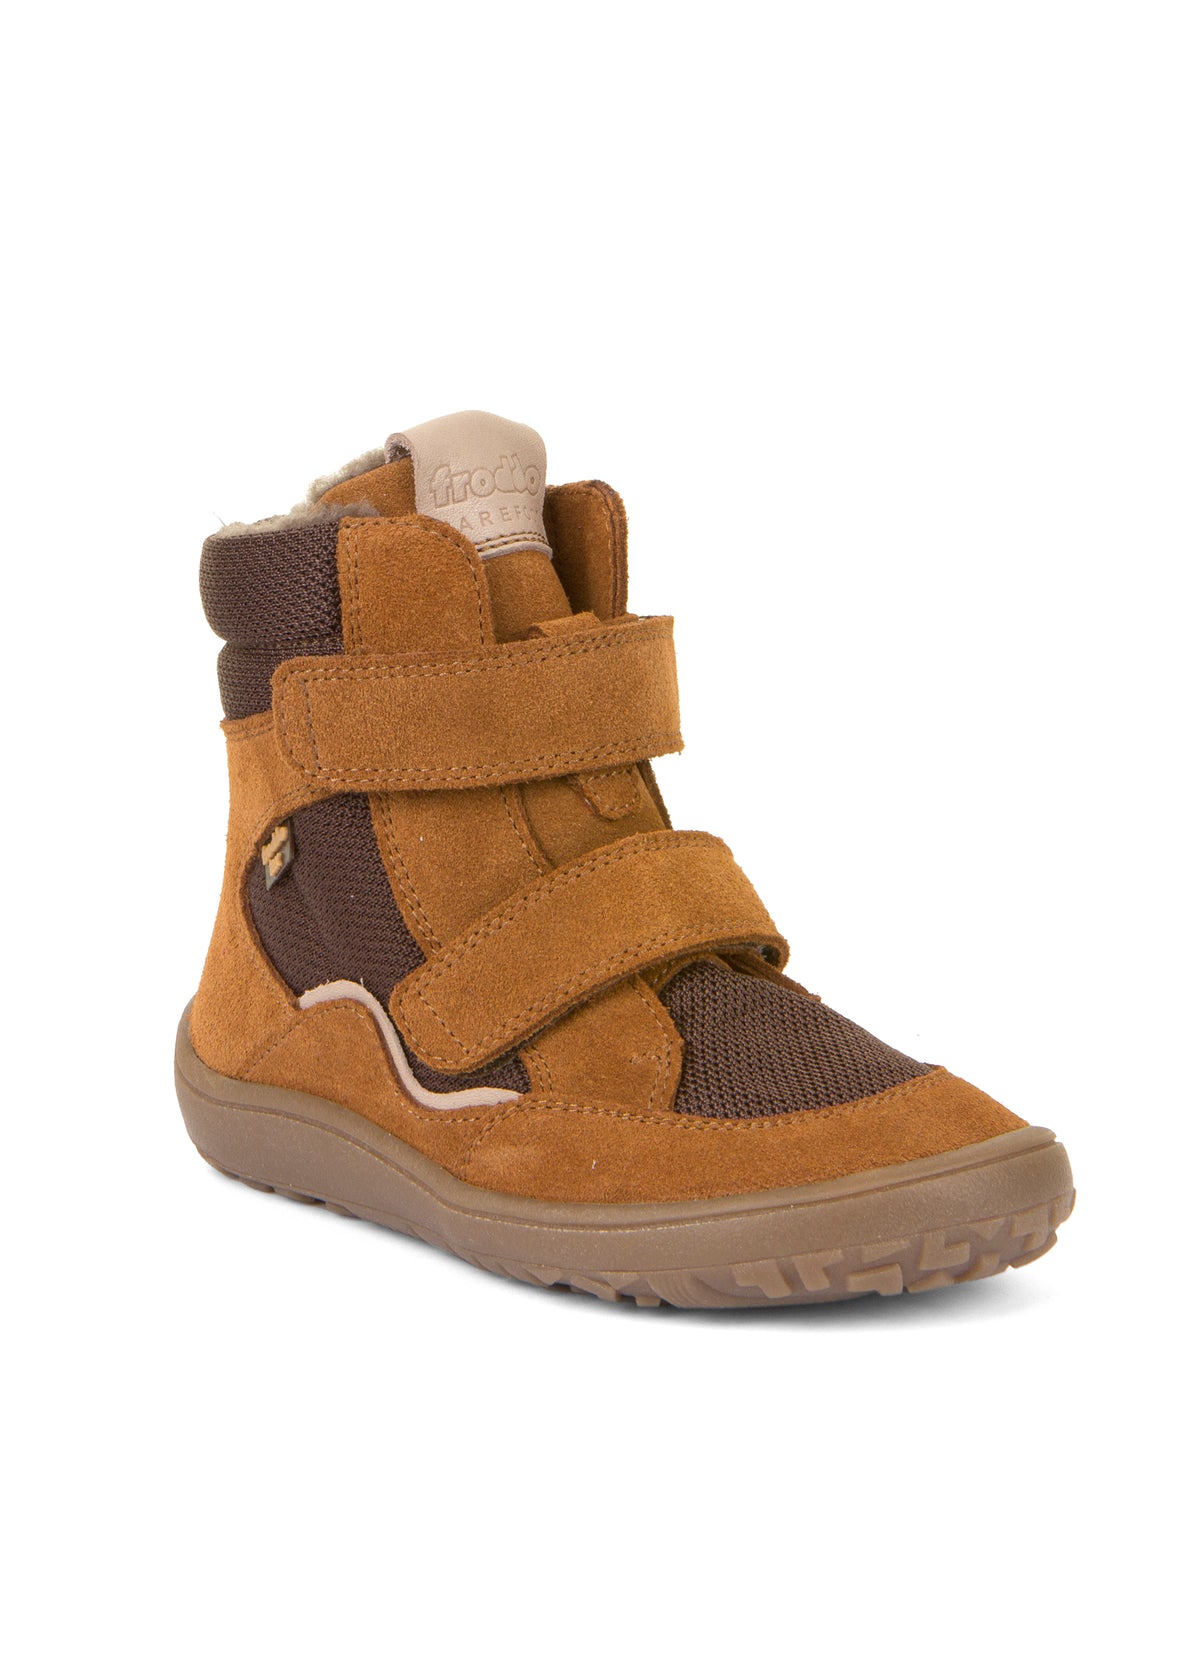 Children's barefoot shoes - winter shoes with TEX membrane - brown